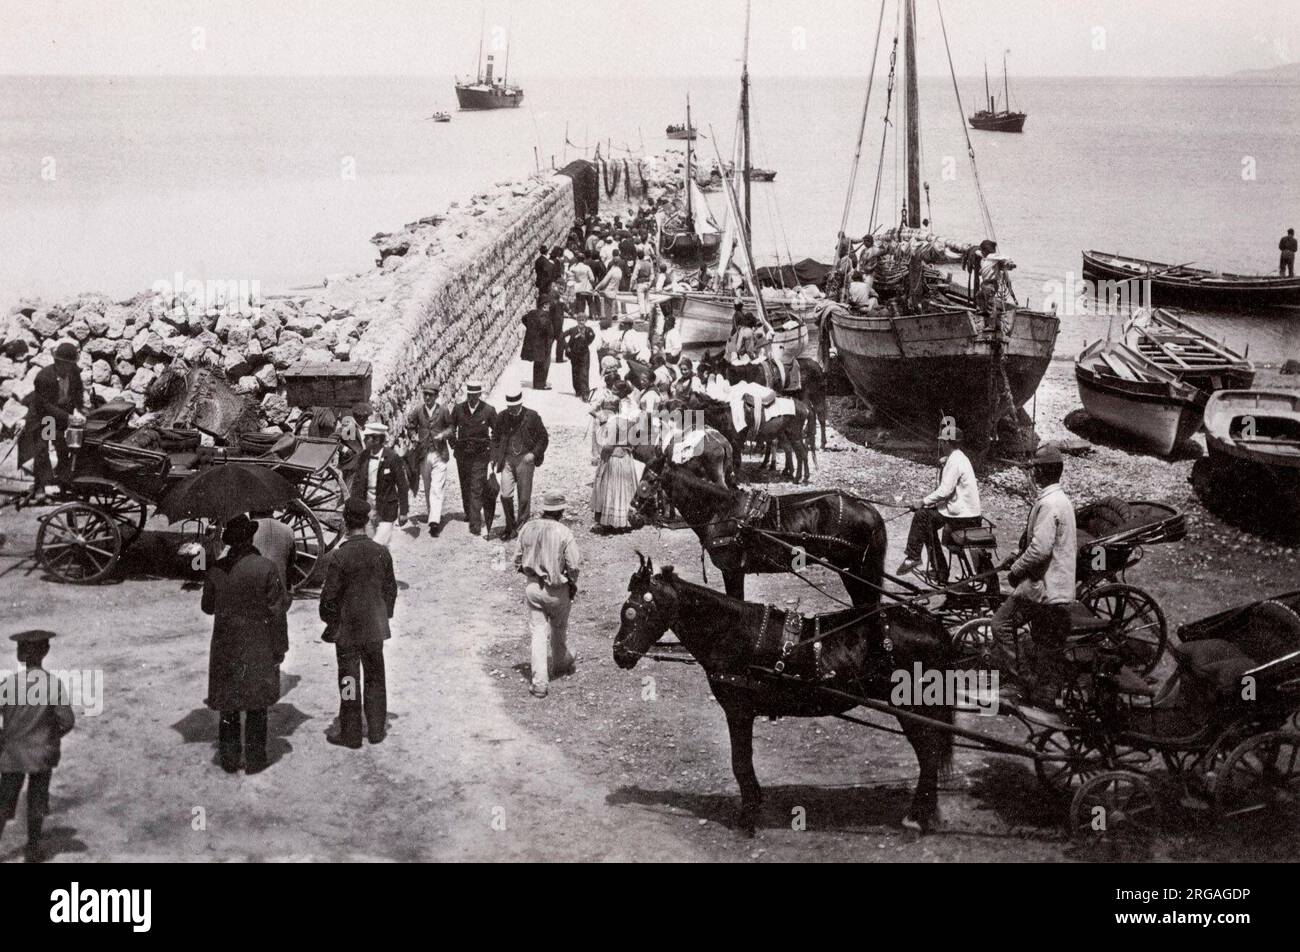 Vintage 19th century photograph - hackney carriages waiting for travellers to arrive off small boats, Capri marina, Italy. Stock Photo